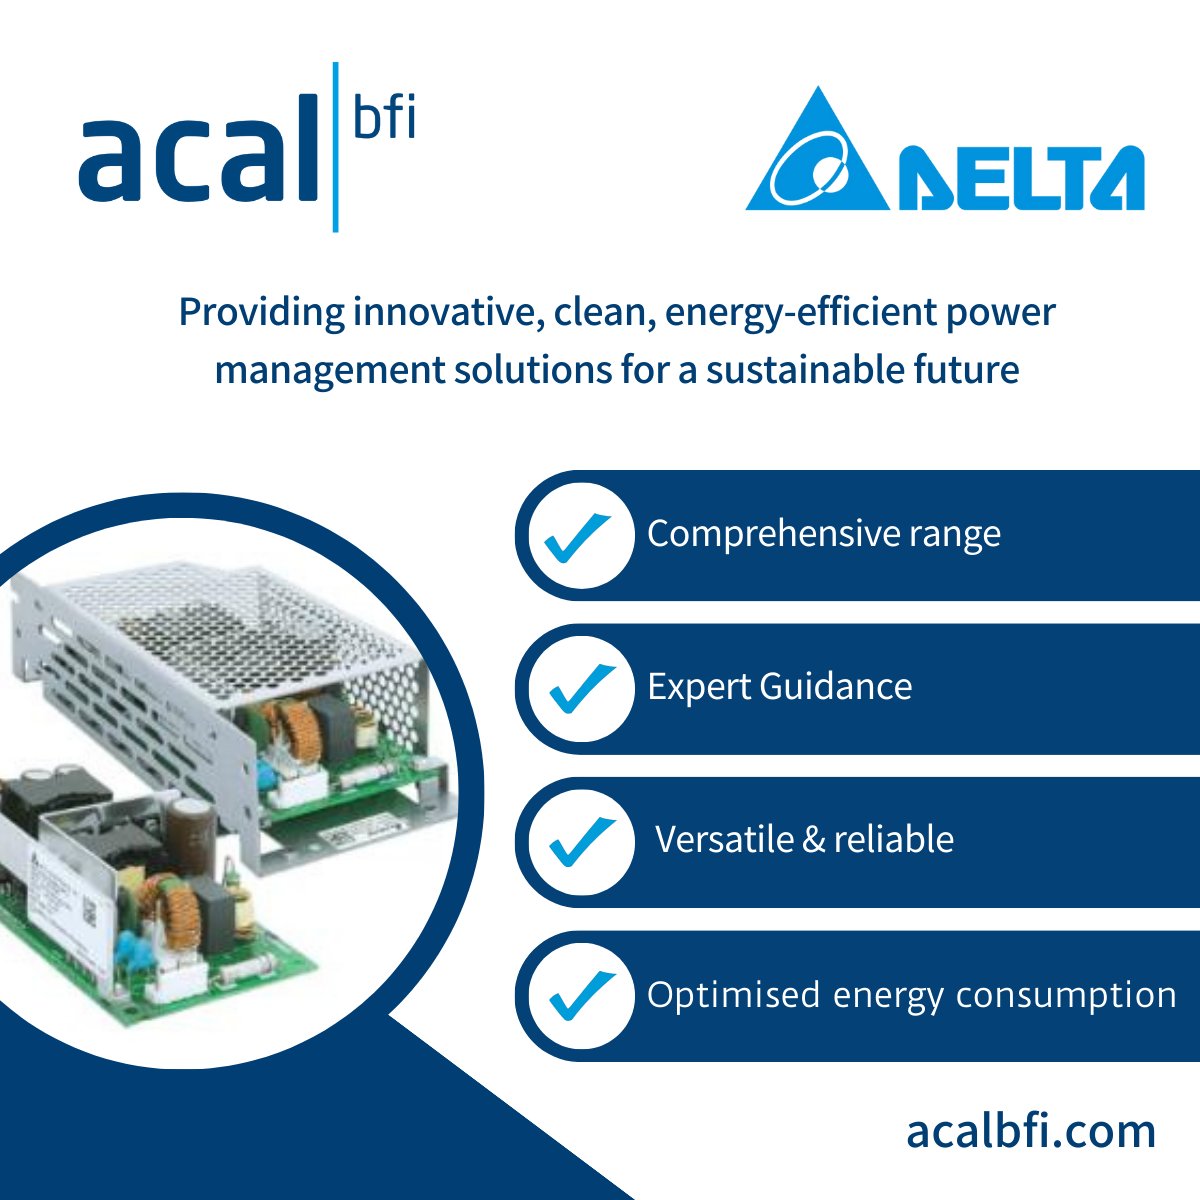 Delta Electronics achieves ground-breaking efficiency with power products surpassing 90% in various categories. Dedicated to creating a sustainable future, their power solutions already reshaping the industry. Visit: bit.ly/48JTkgz